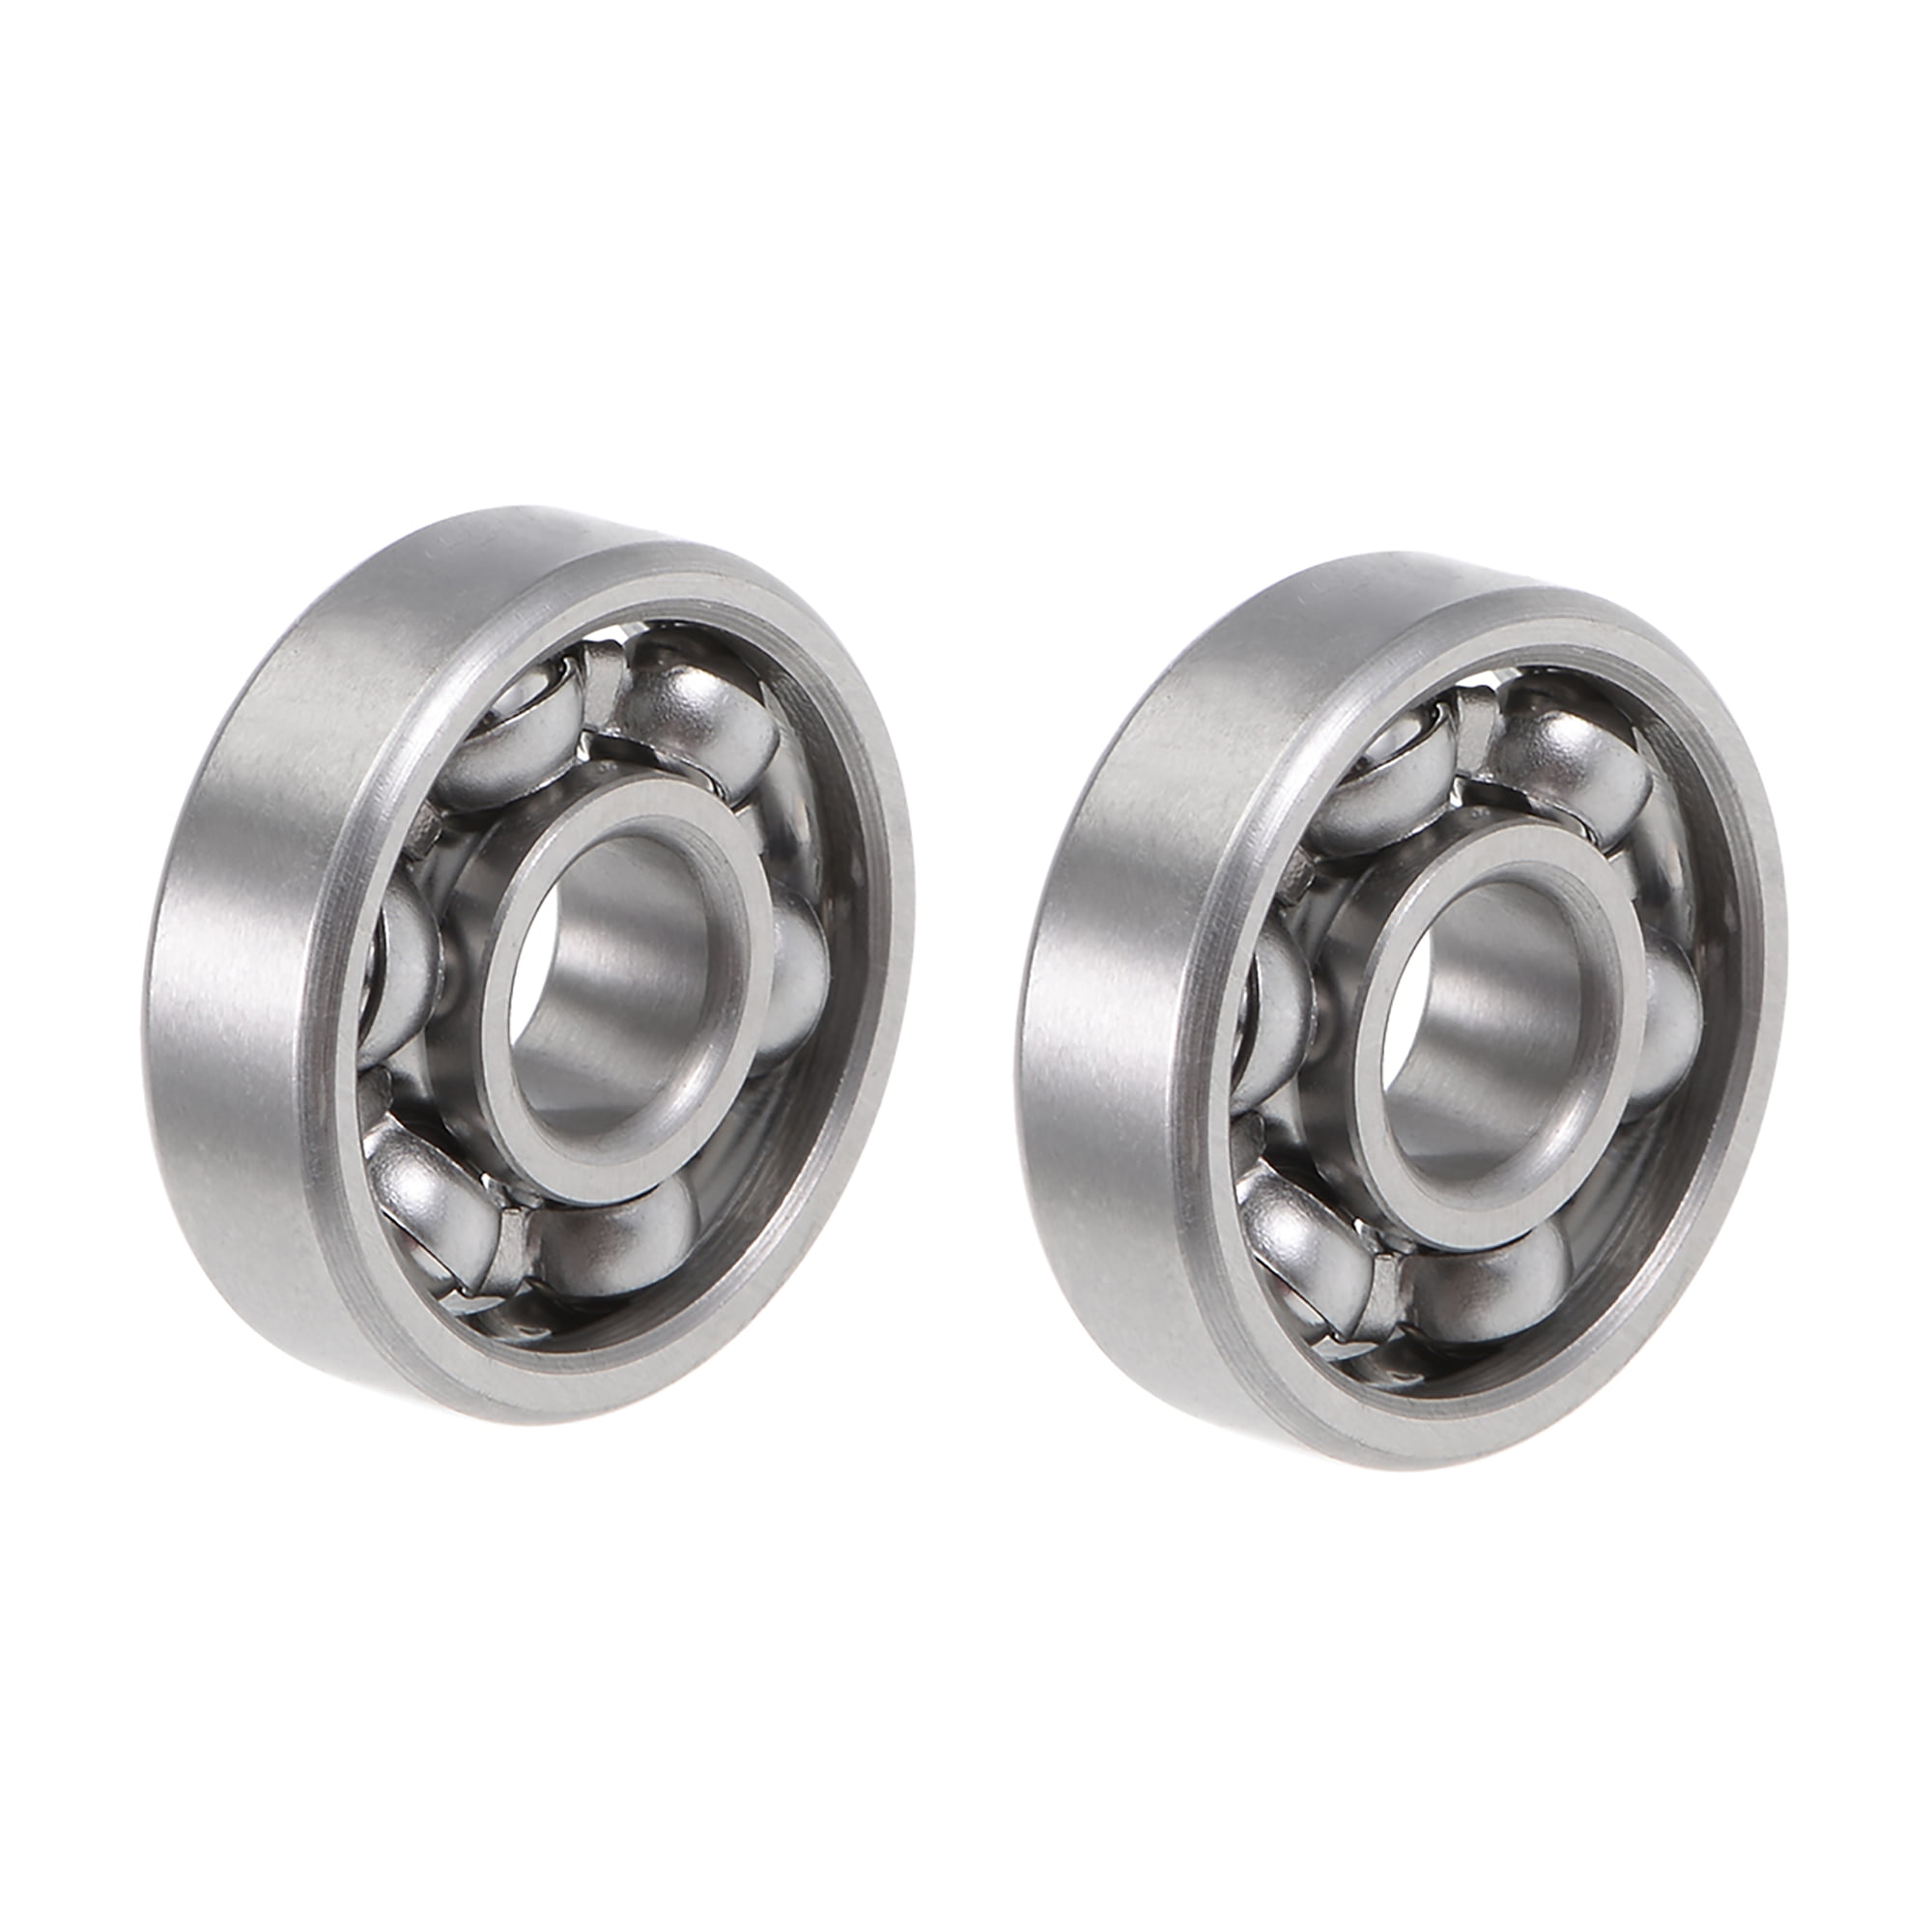 Flanged and Shielded ABEC 7-3/32" Axle Ball Bearings One Pair 